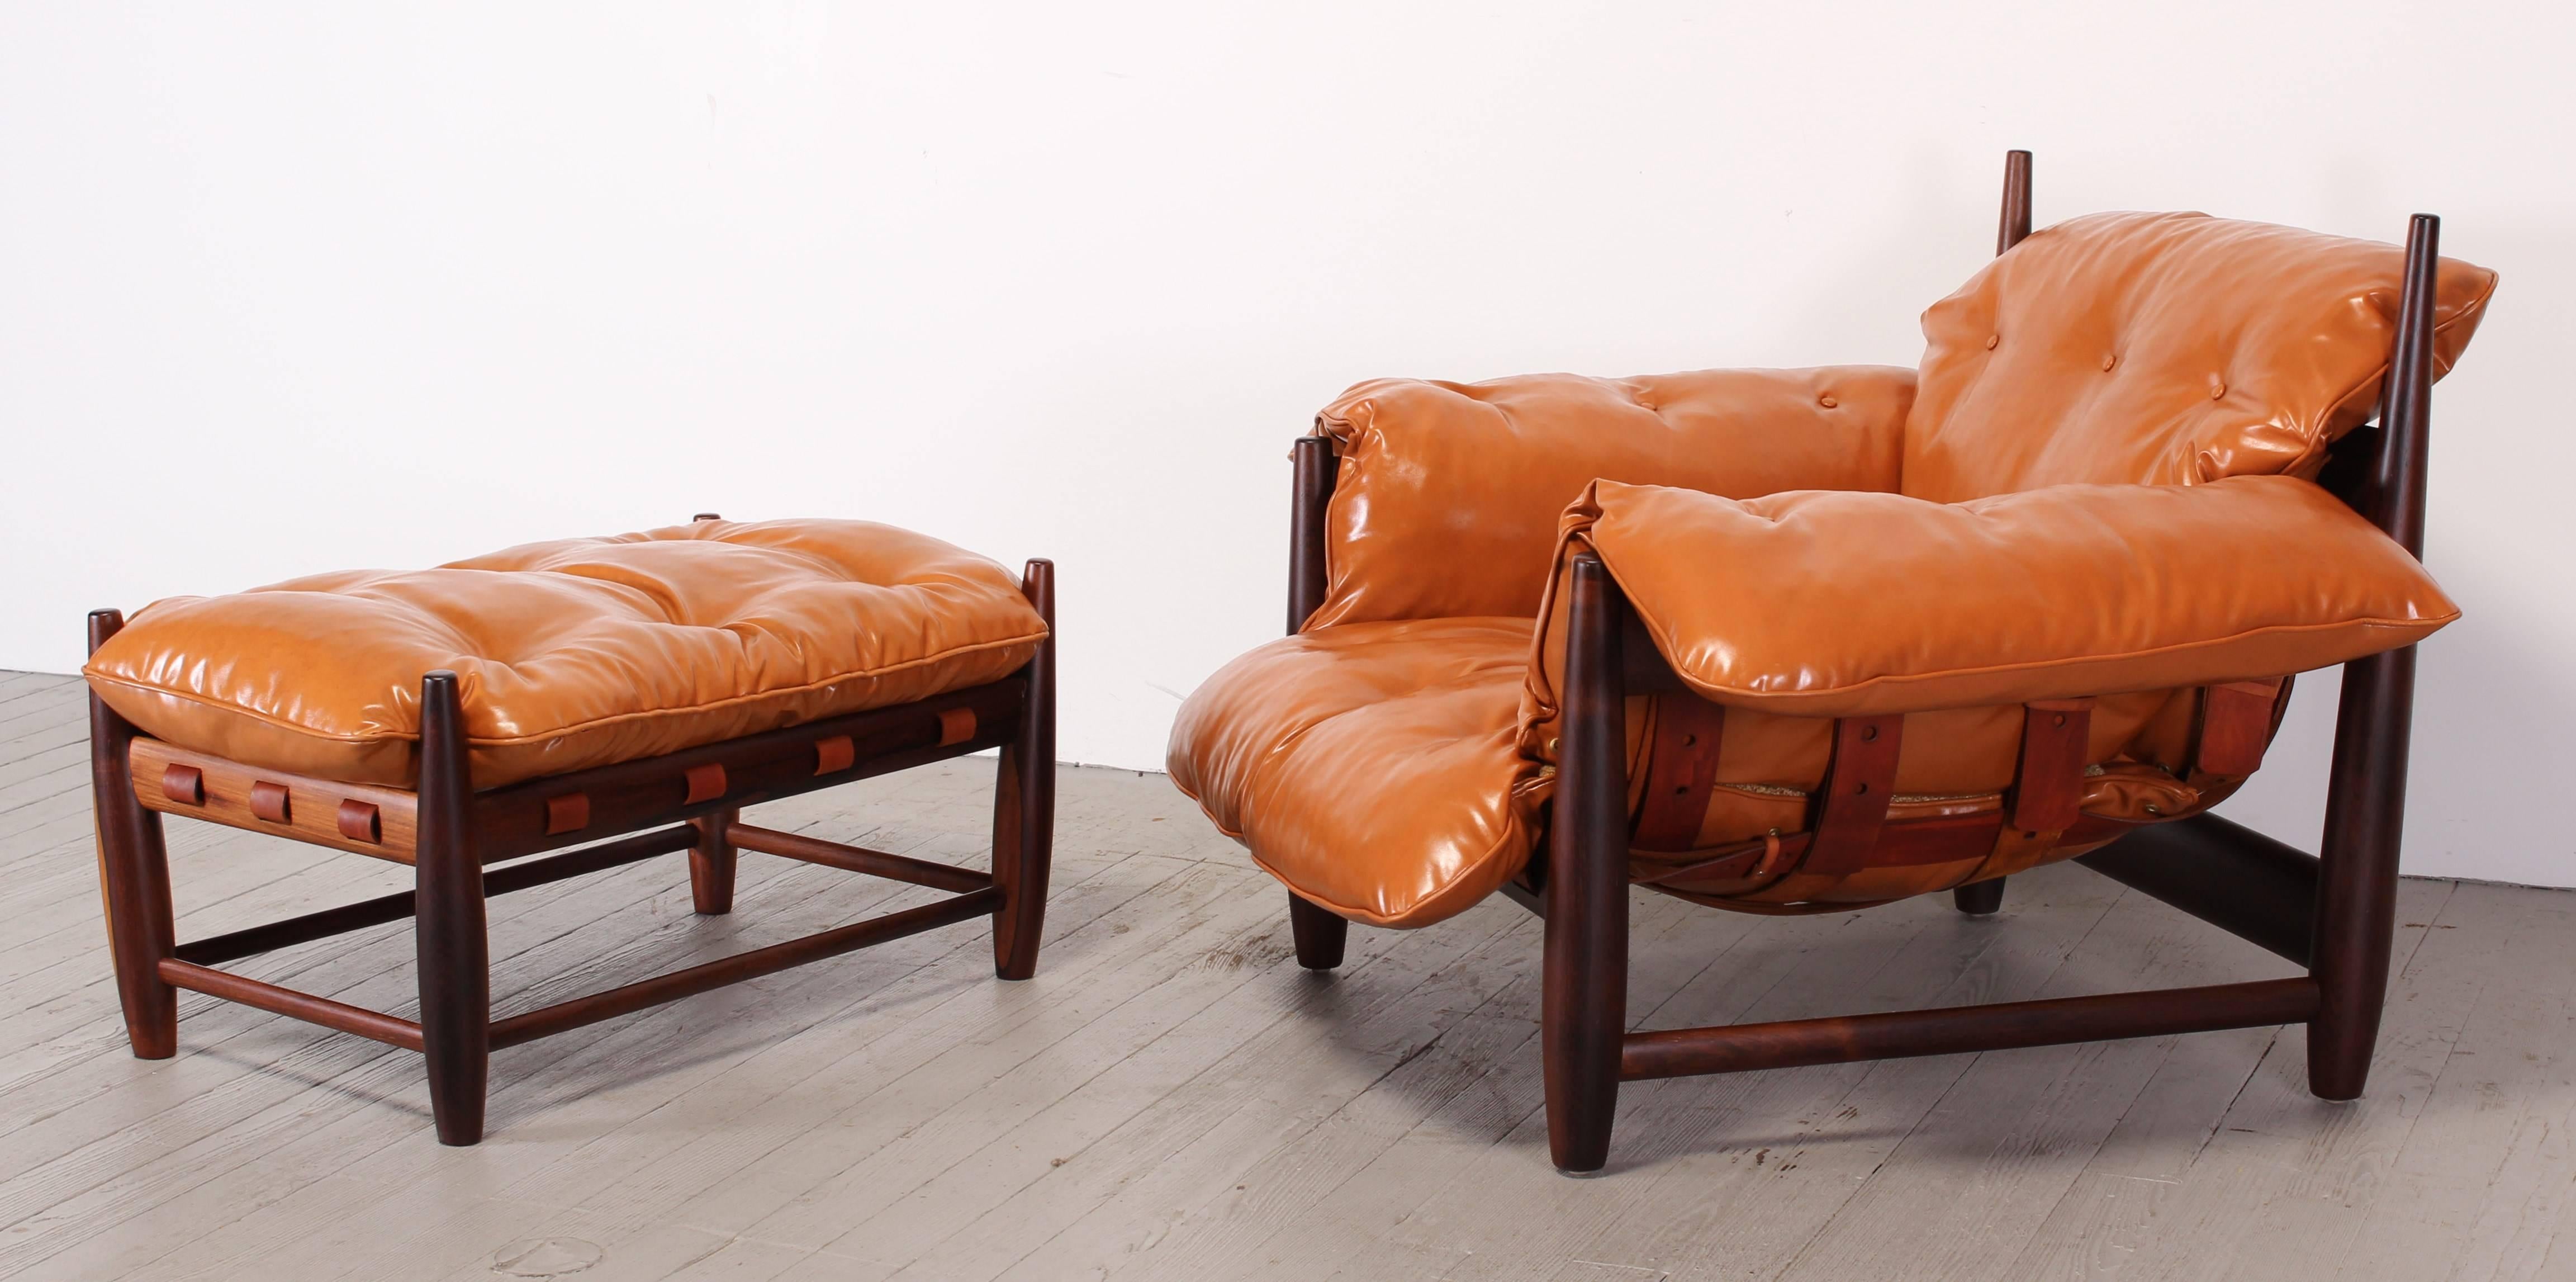 Early version of the original vintage Jacaranda lounge chair and ottoman from the 